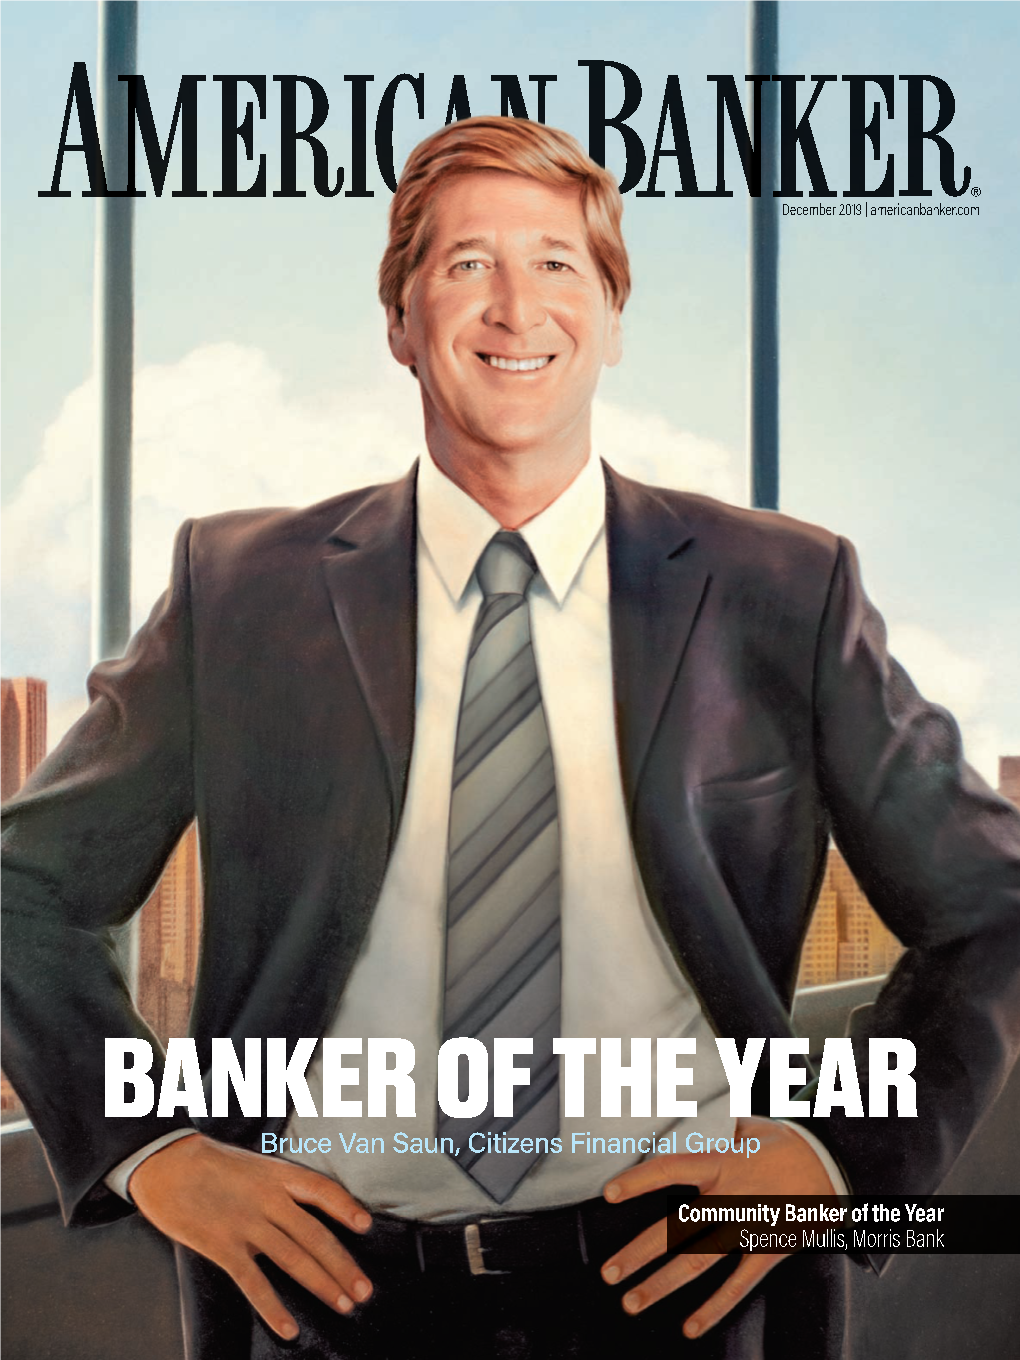 BANKER of the YEAR Bruce Van Saun, Citizens Financial Group